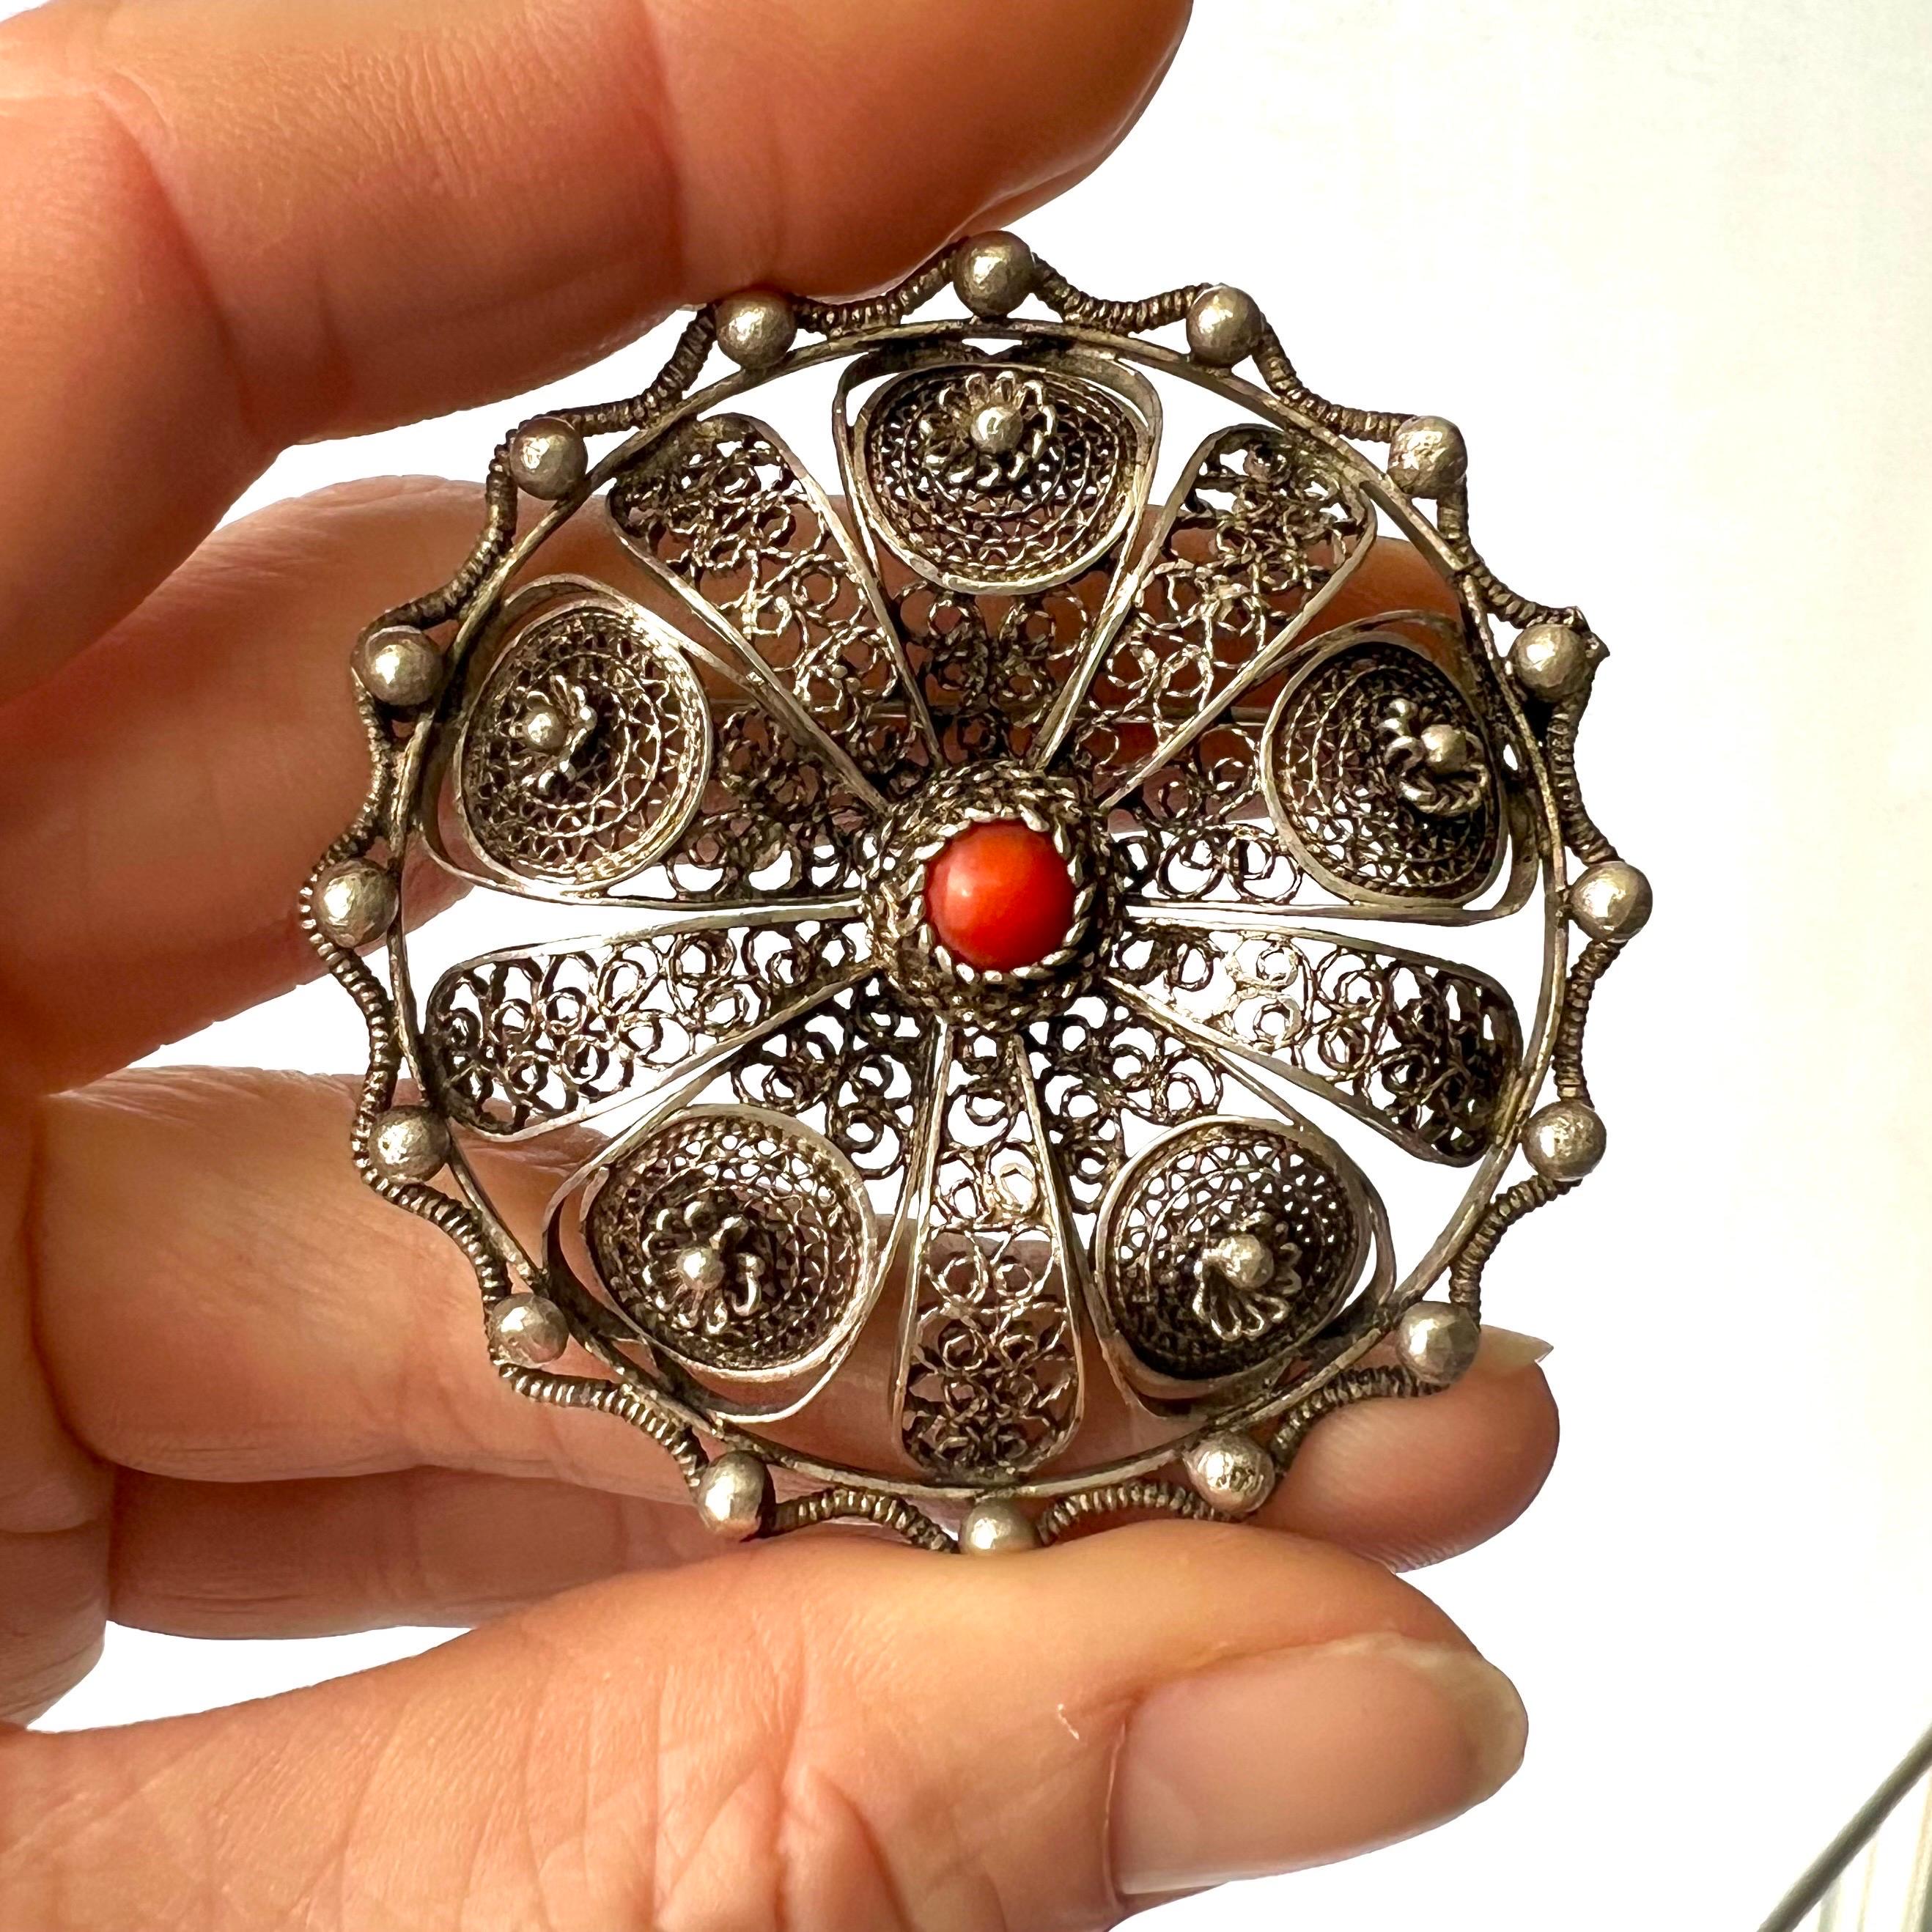 This is a lovely vintage silver round brooch created with fine rosettes and filigree work. The brooch is crafted with very fine filigree, floral rosettes and one coral stone in the center. The border is applied with small silver balls decorated with